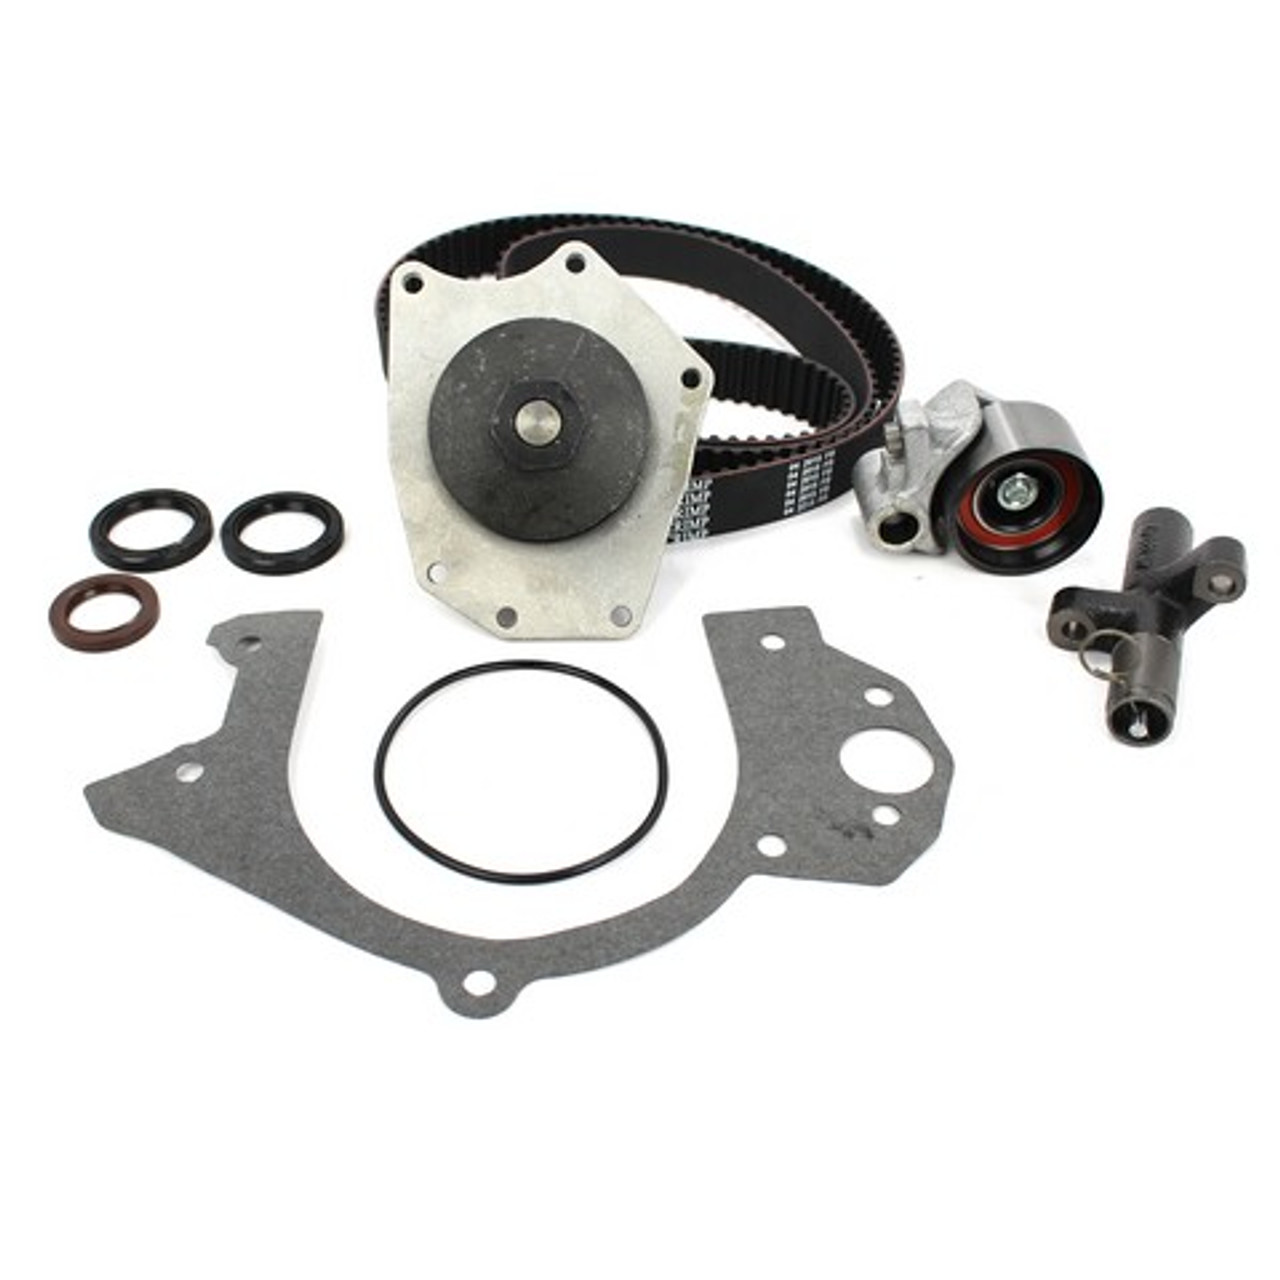 Timing Belt Kit with Water Pump 3.5L 1997 Eagle Vision - TBK1145BWP.4